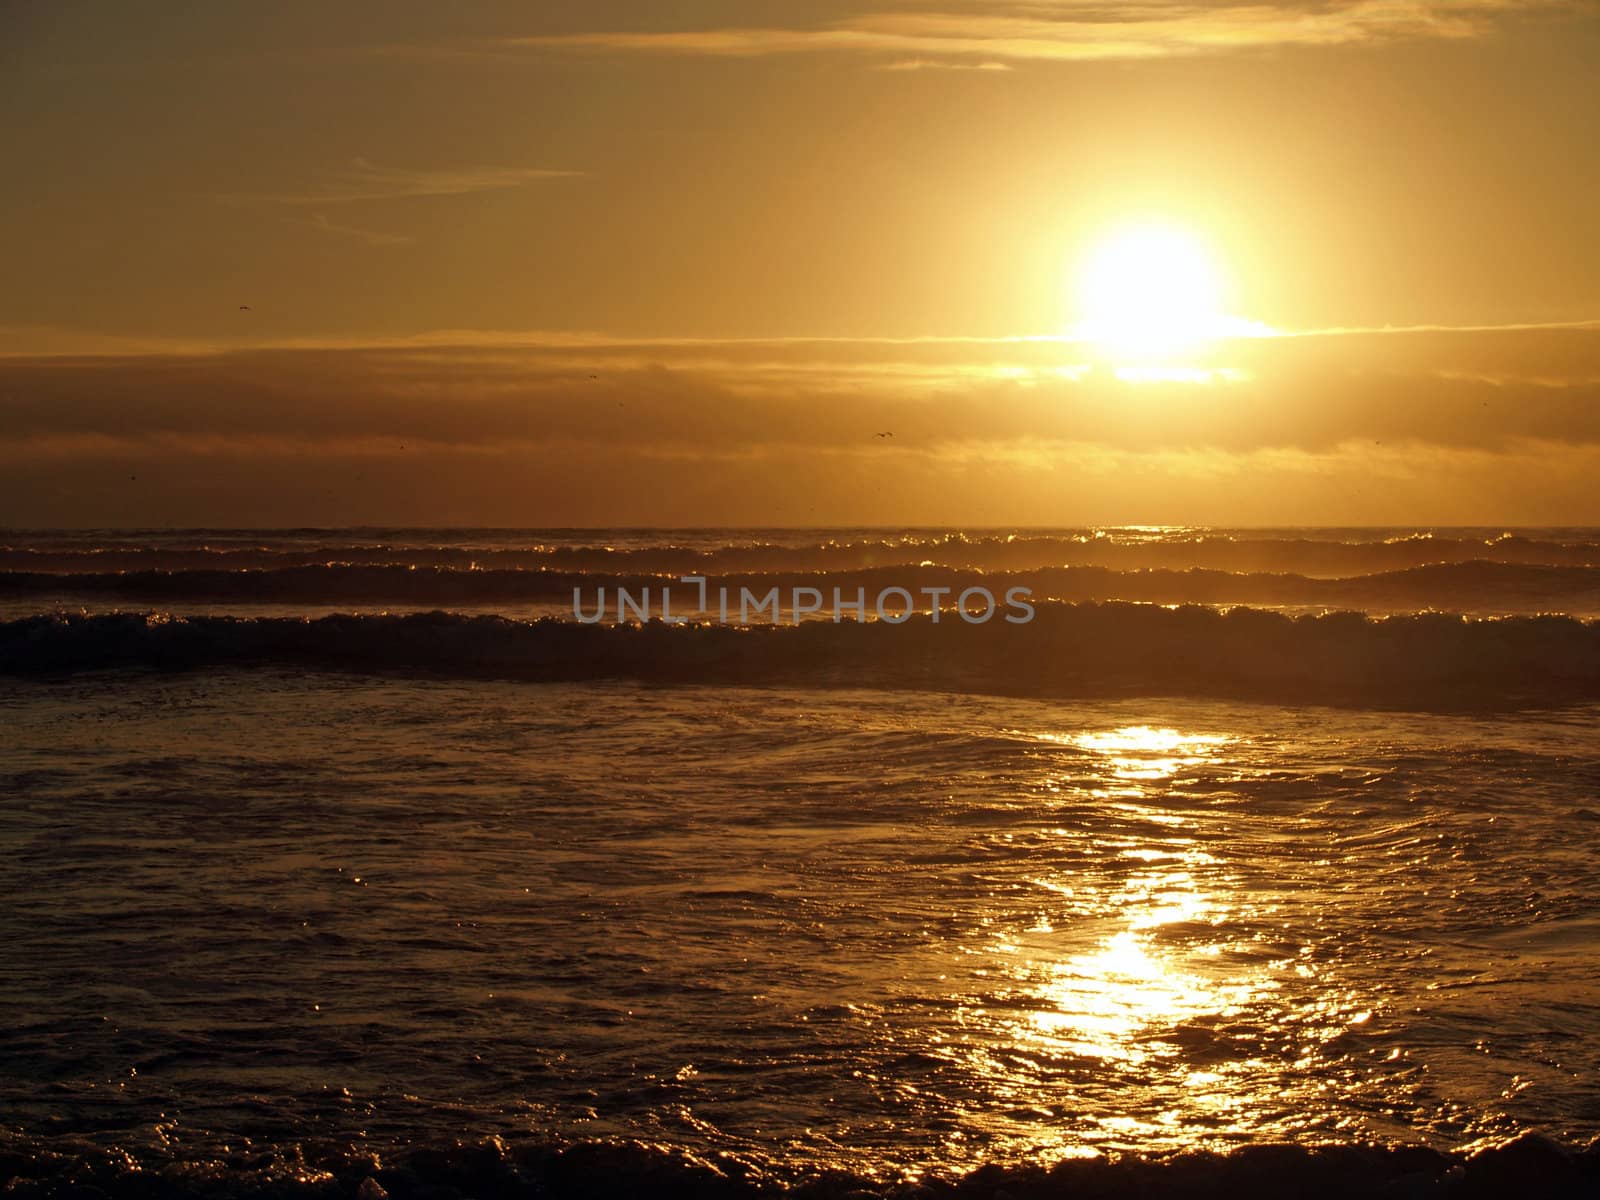 Golden Sunset Over the Ocean wth Waves in the Foreground